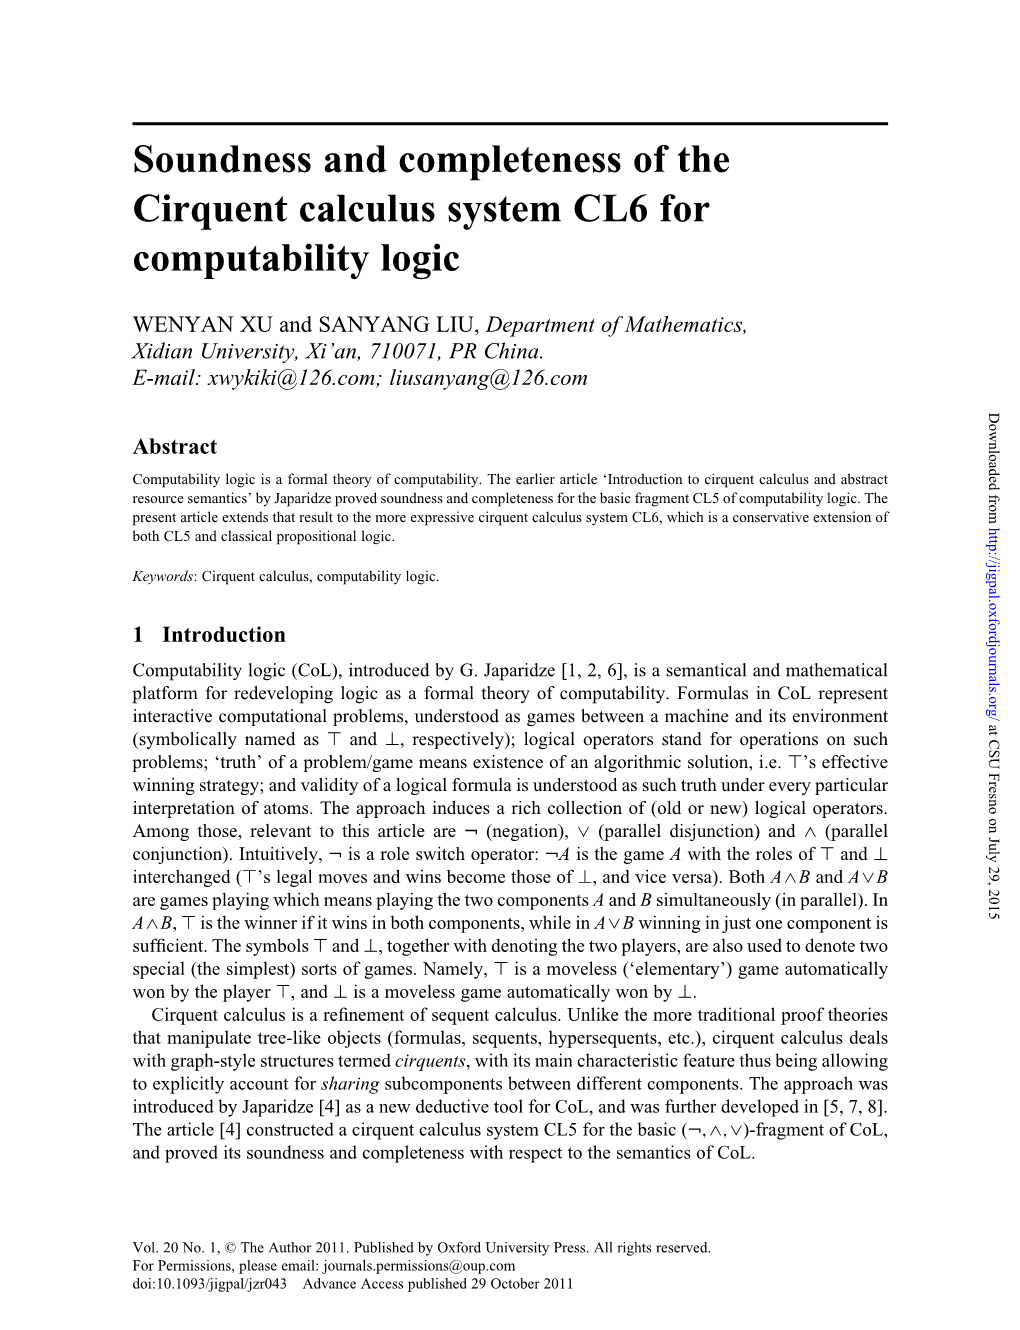 Soundness and Completeness of the Cirquent Calculus System CL6 for Computability Logic